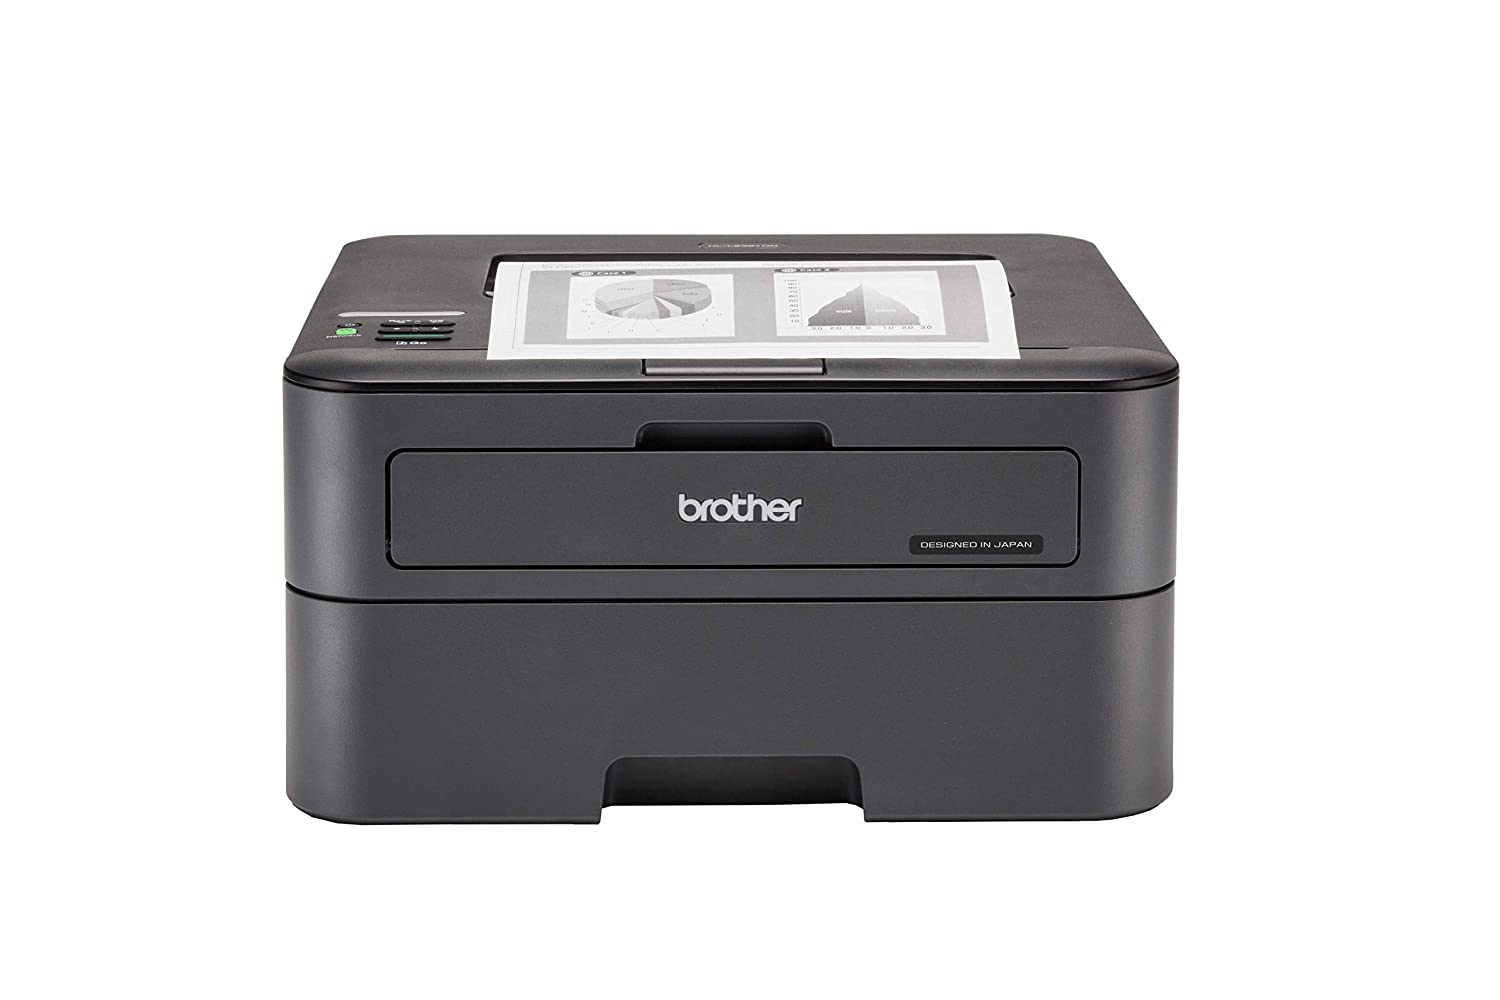 Brother HL-L2361DN Compact, High Speed Laser Printer with Duplex and Network 